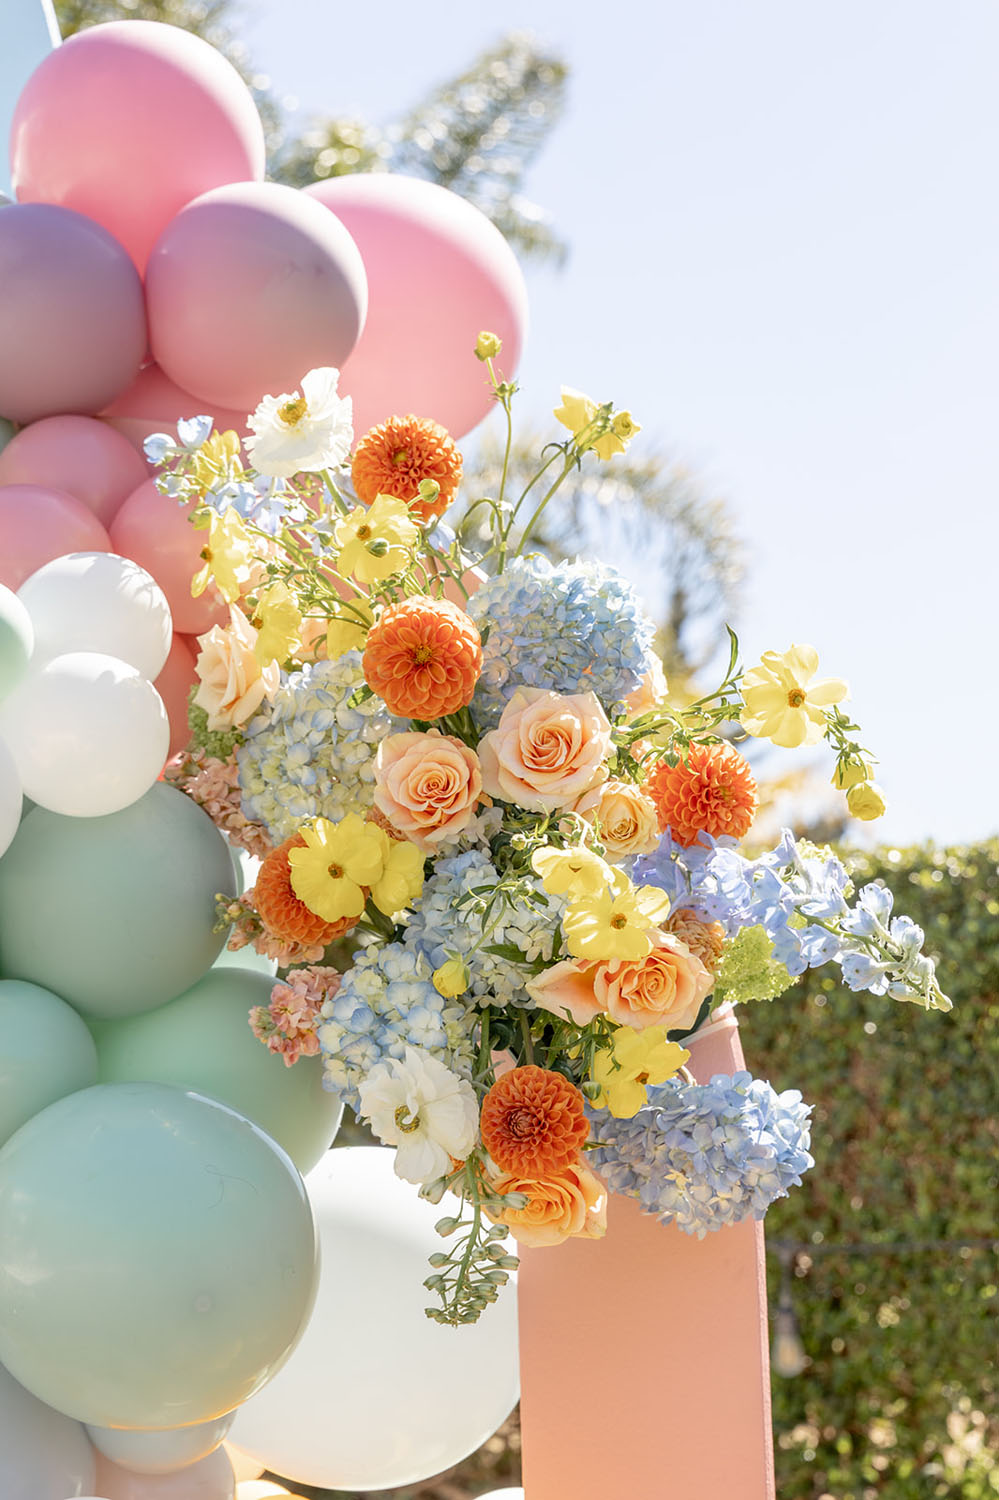 floral and balloon decorations for spring